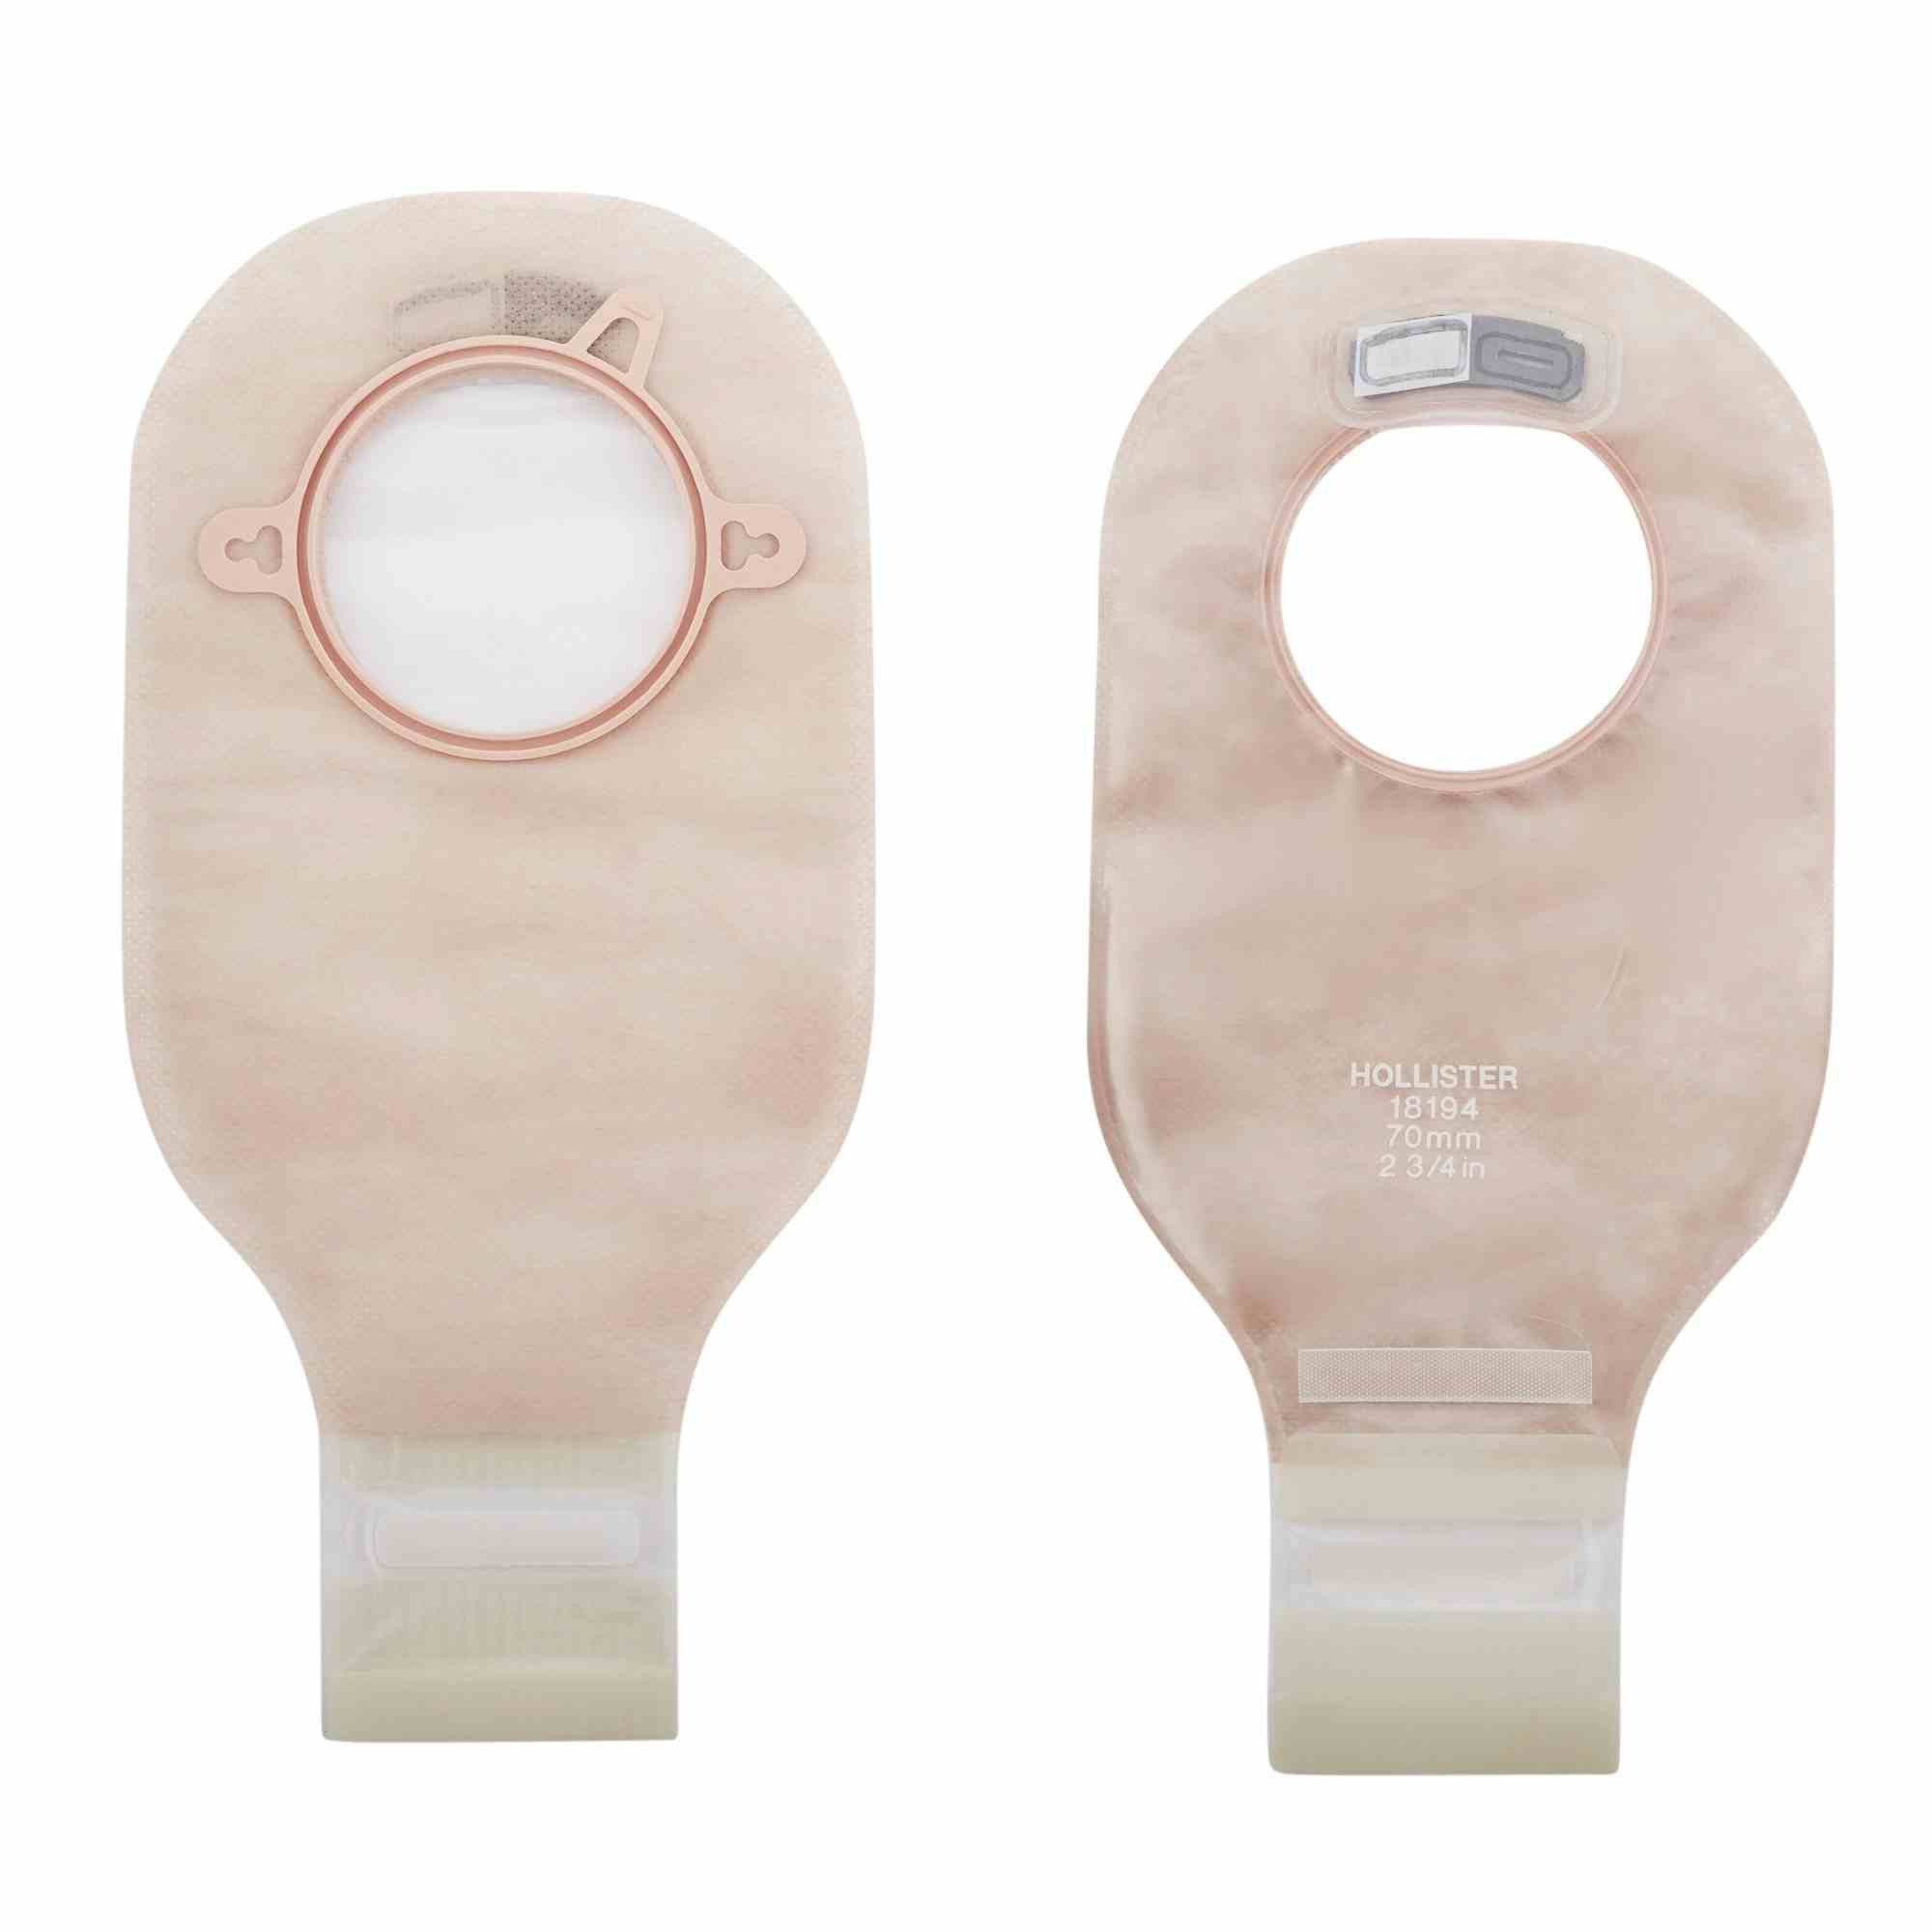 New Image Colostomy Pouch, 12" Length, Drainable, 18194, Transparent - Box of 10